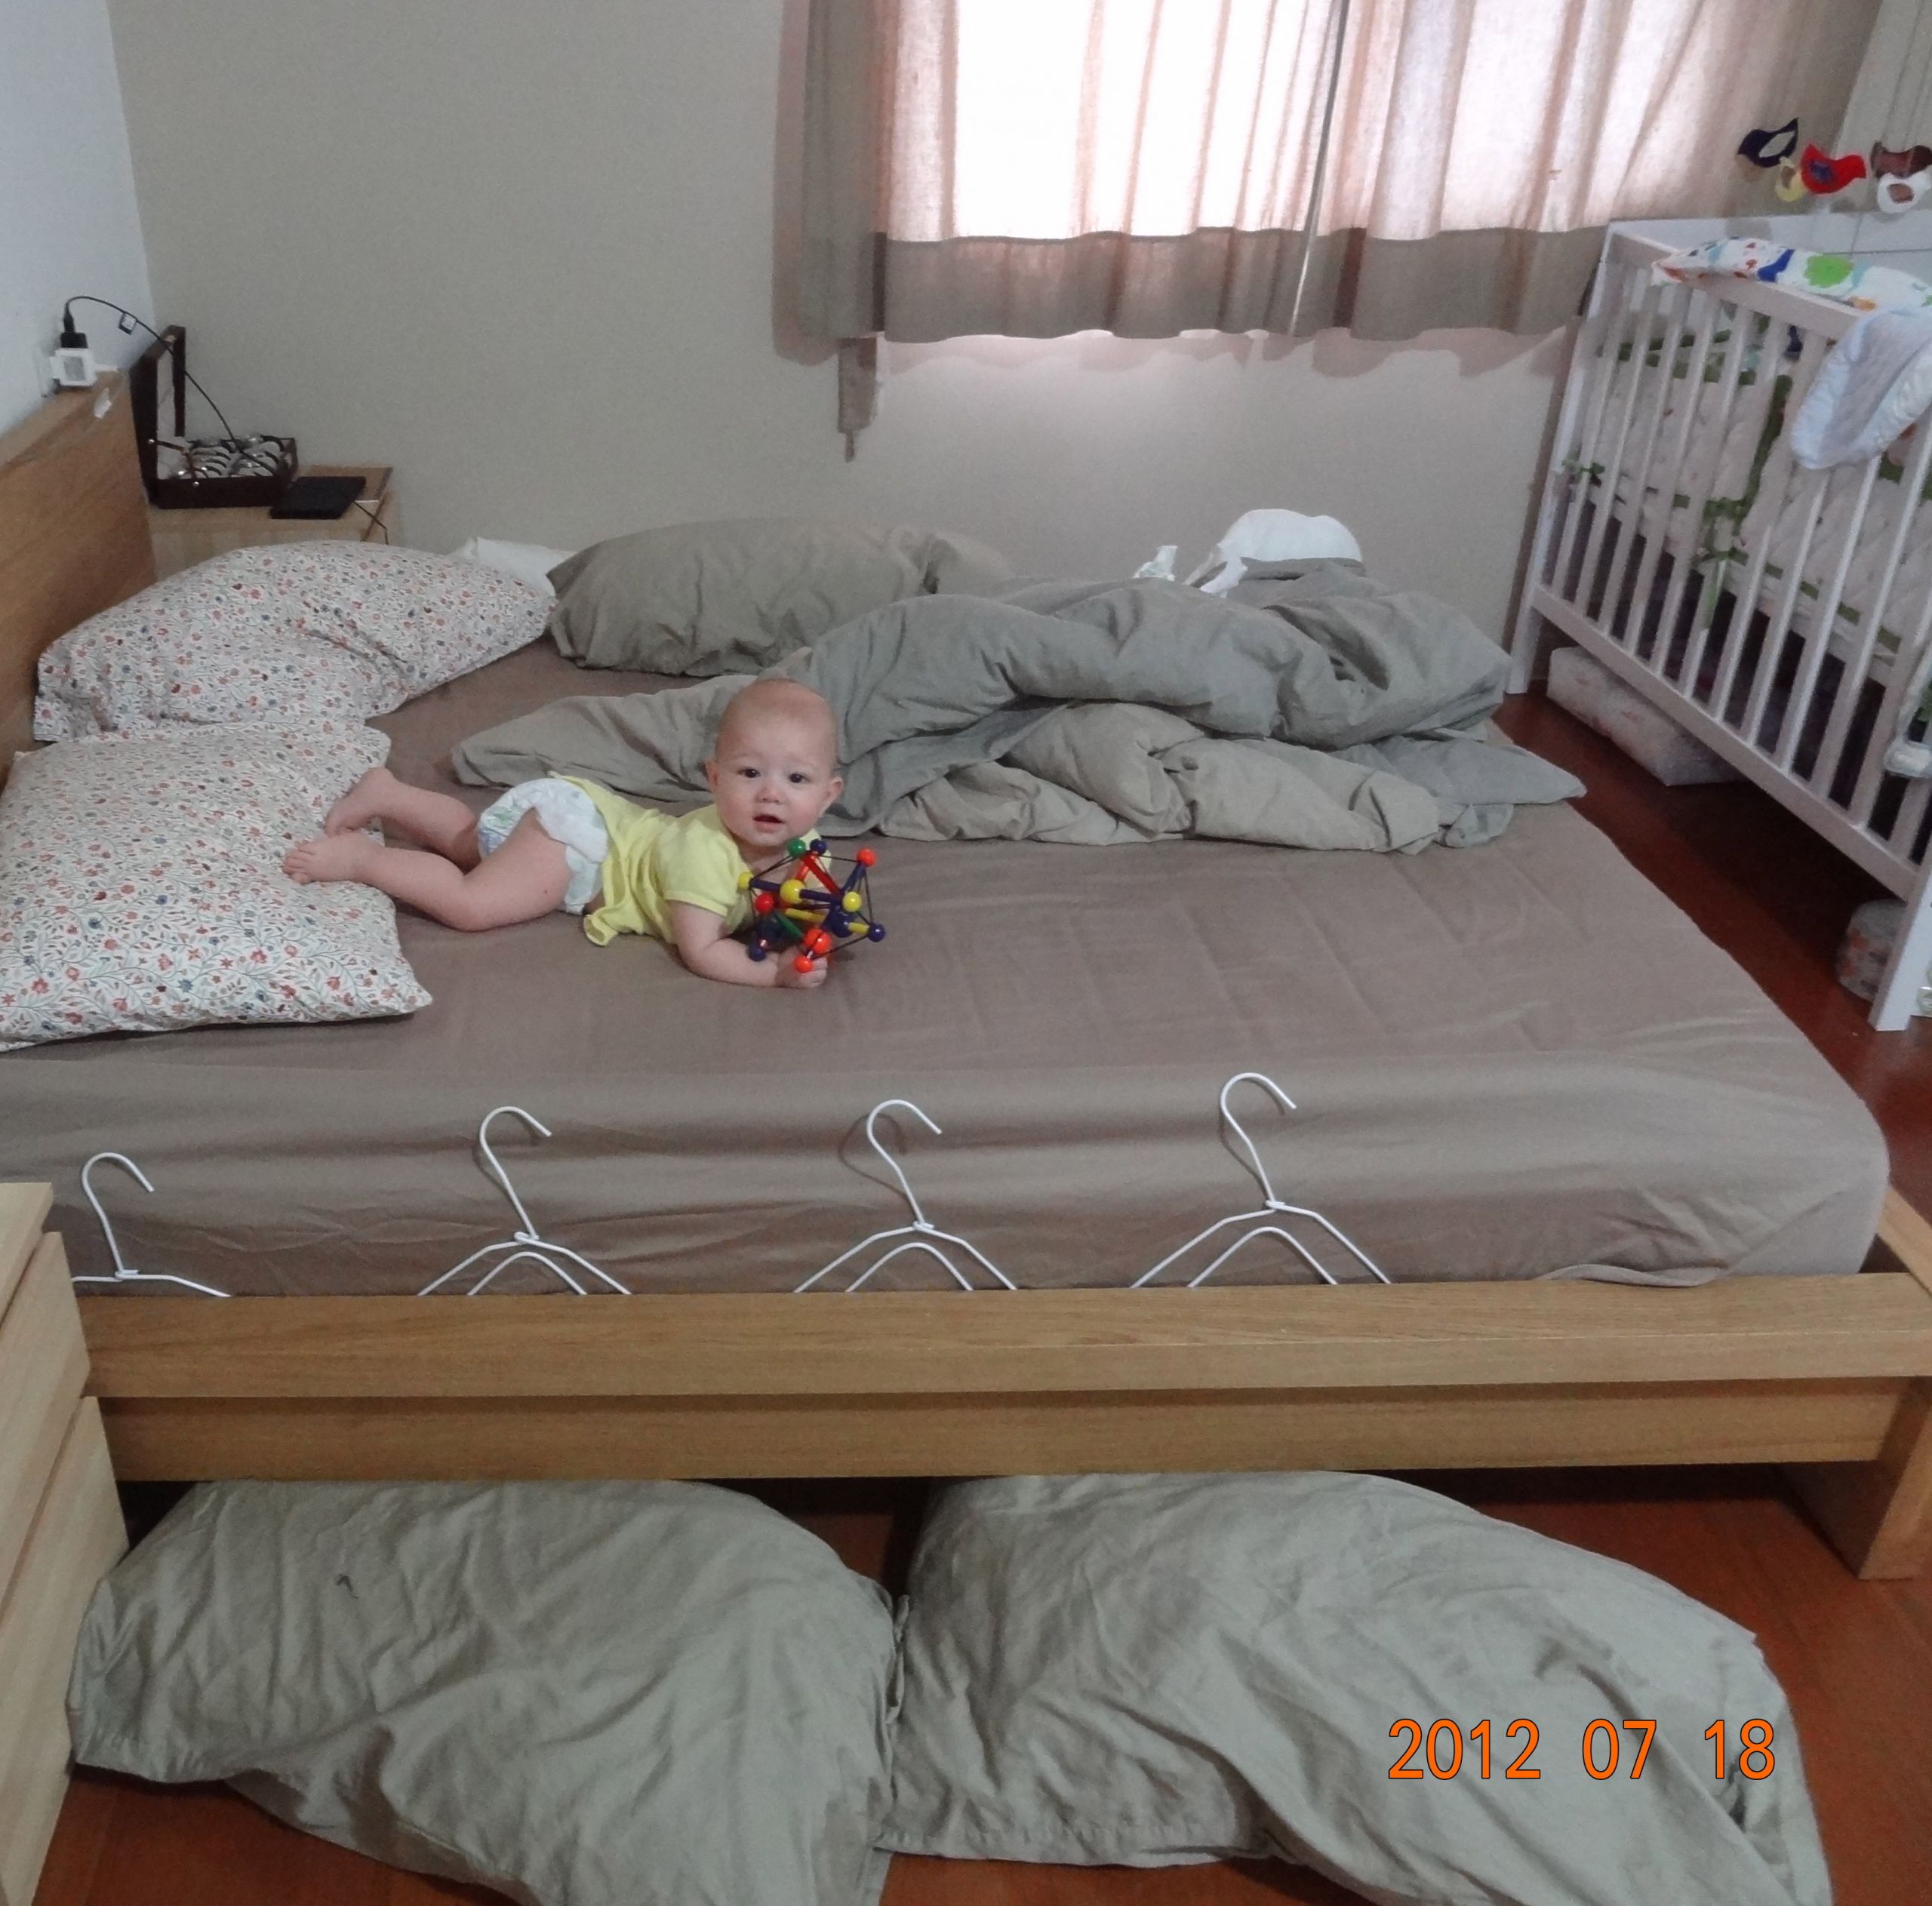 DIY Bed Rails For Toddler
 DIY baby Bedrail with swimming noodle